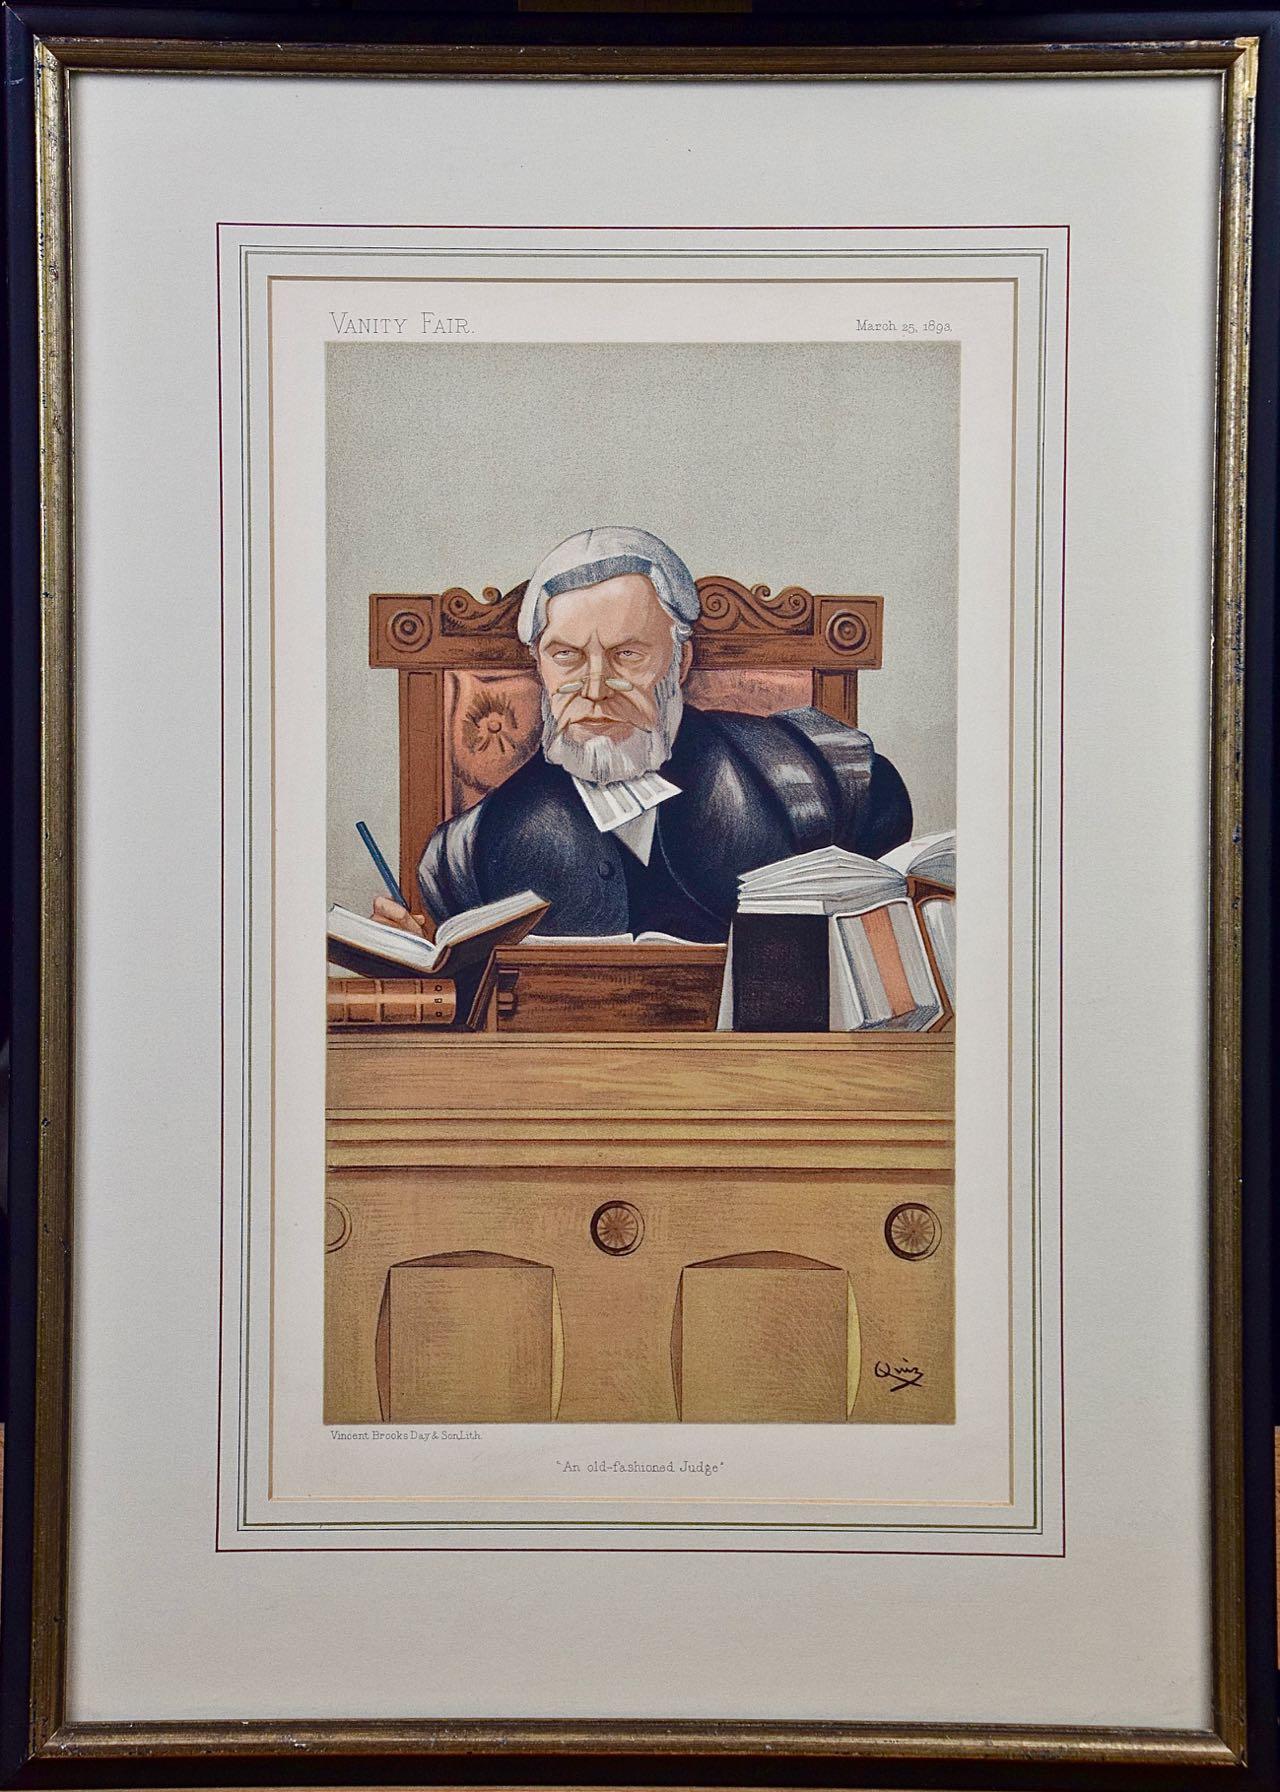 Original 19th C. Vanity Fair Caricature of "An Old Fashioned Judge", Henry Lopes